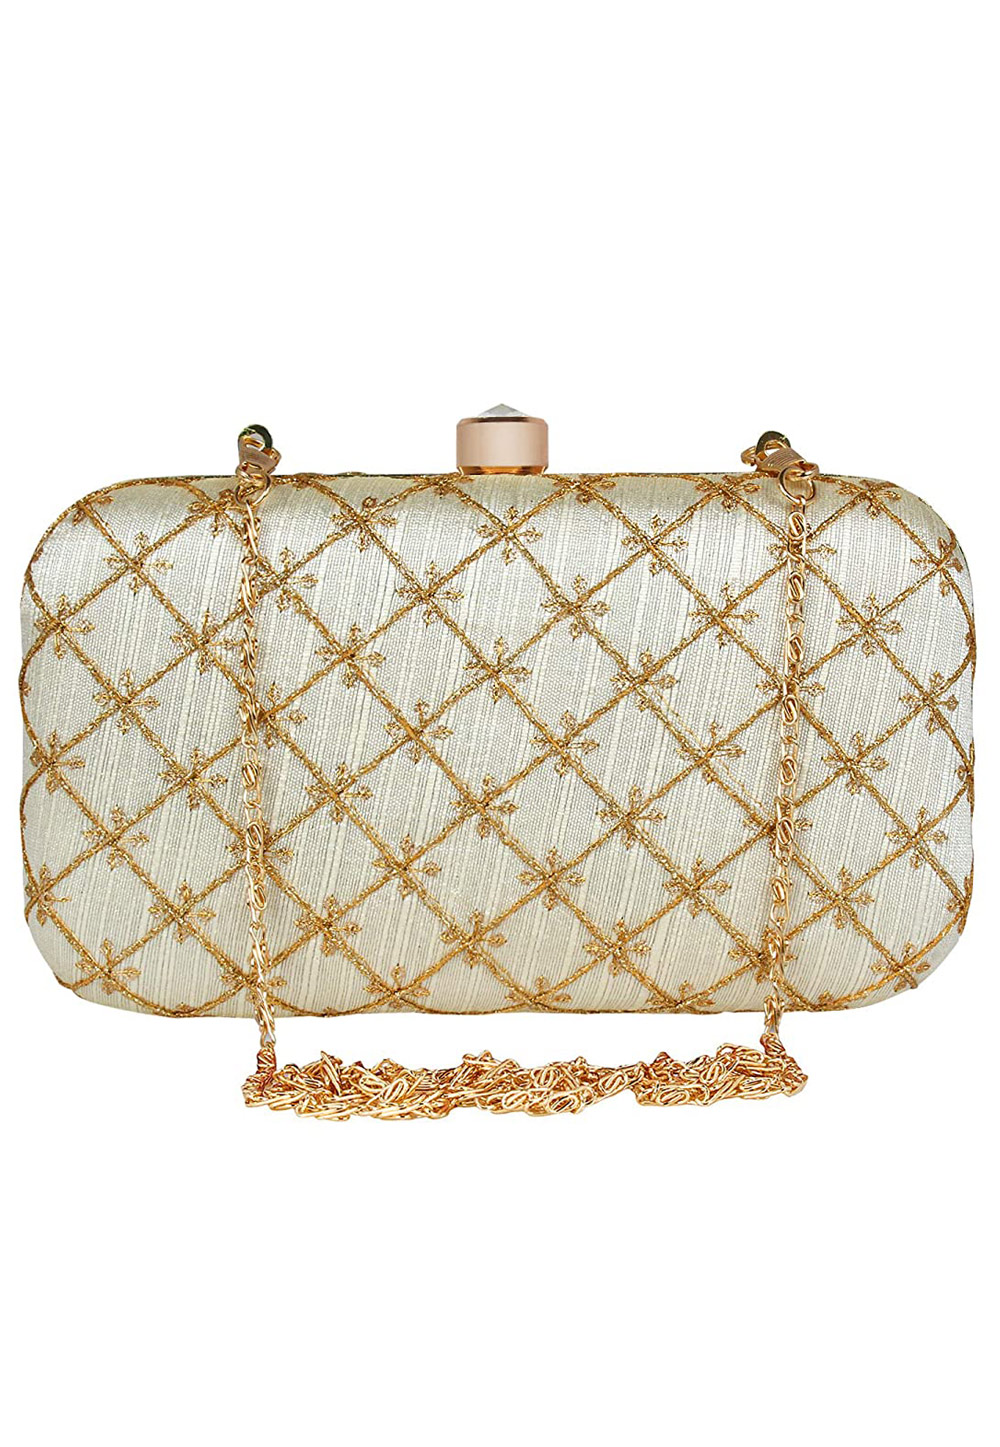 Off White Synthetic Embroidered Clutch 225779